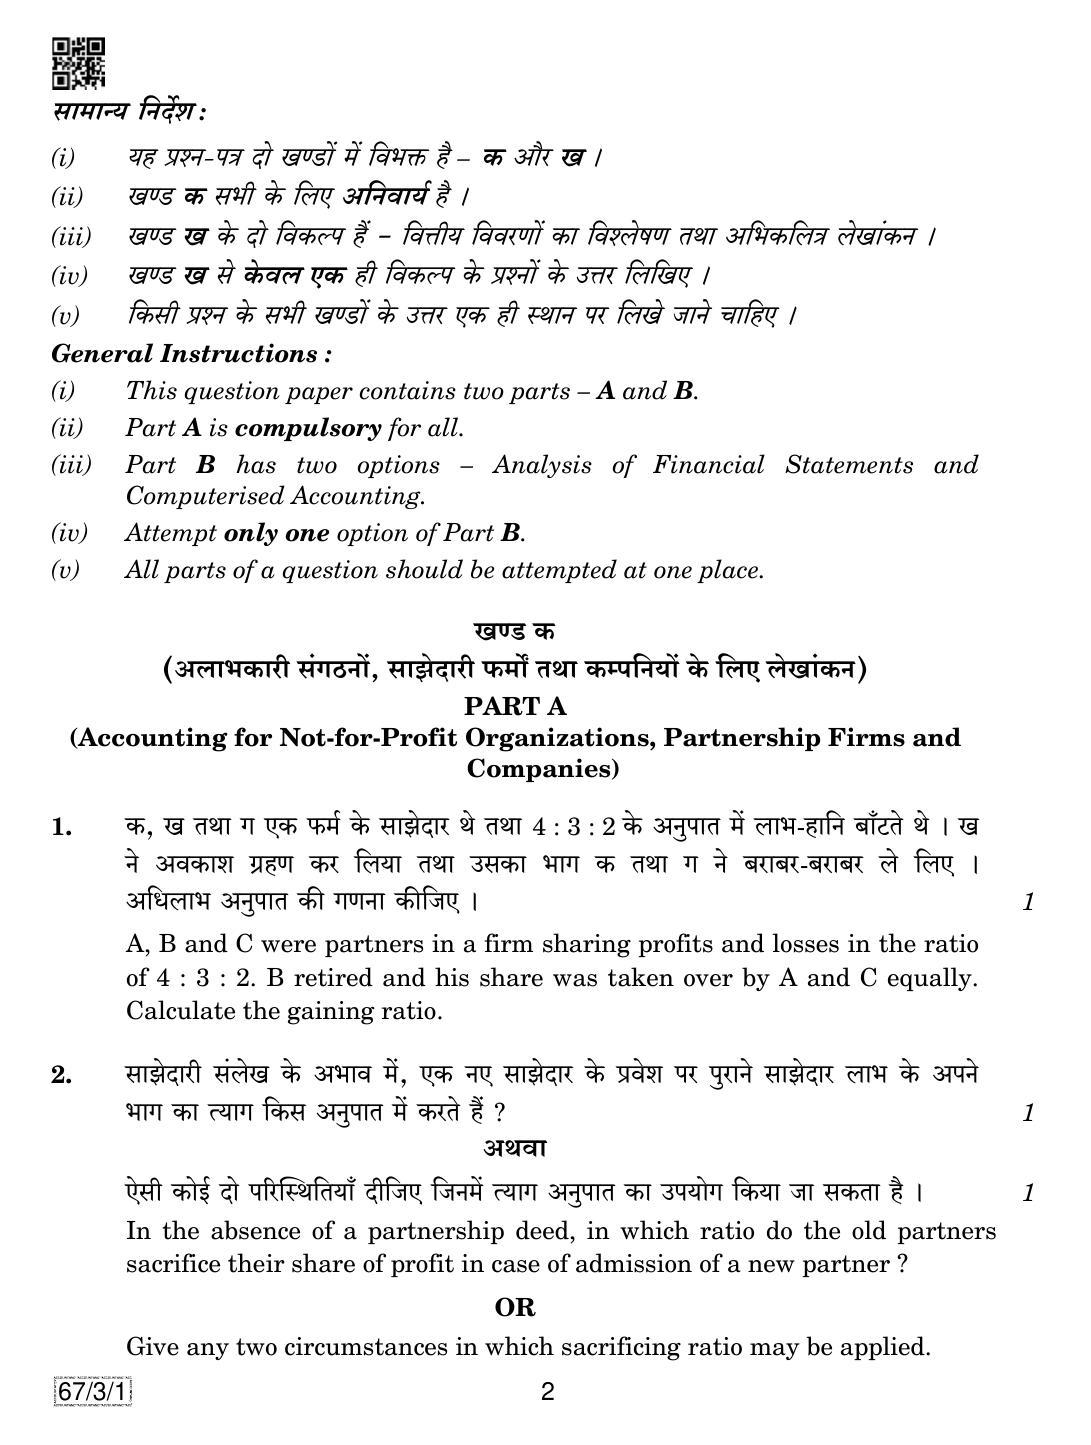 CBSE Class 12 67-3-1 Accountancy 2019 Question Paper - Page 2